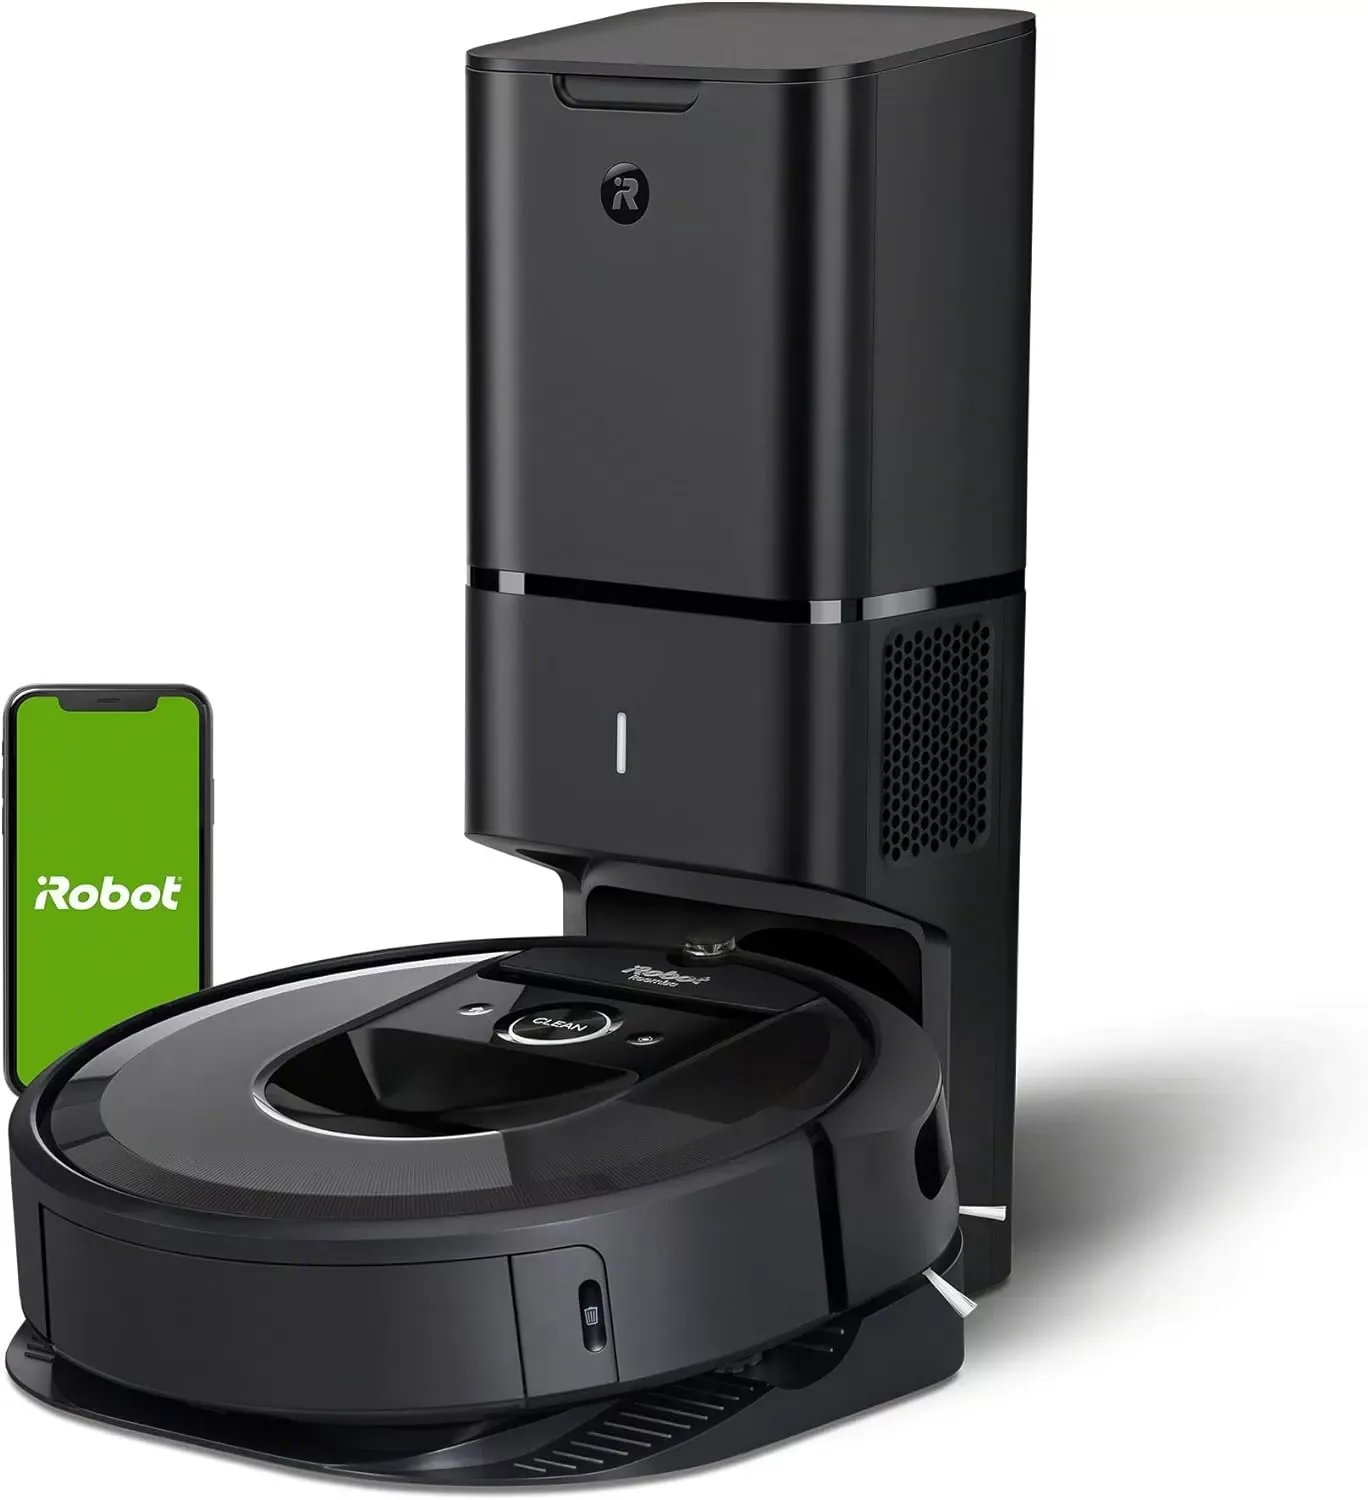 iRobot Roomba j6+ (6550) Self-Emptying Robot Vacuum – Identifies and avoids pet Waste & Cords, Empties Itself for 60 Days, Smart Mapping, Compatible with Alexa, Ideal for Pet Hair, Roomba J6+